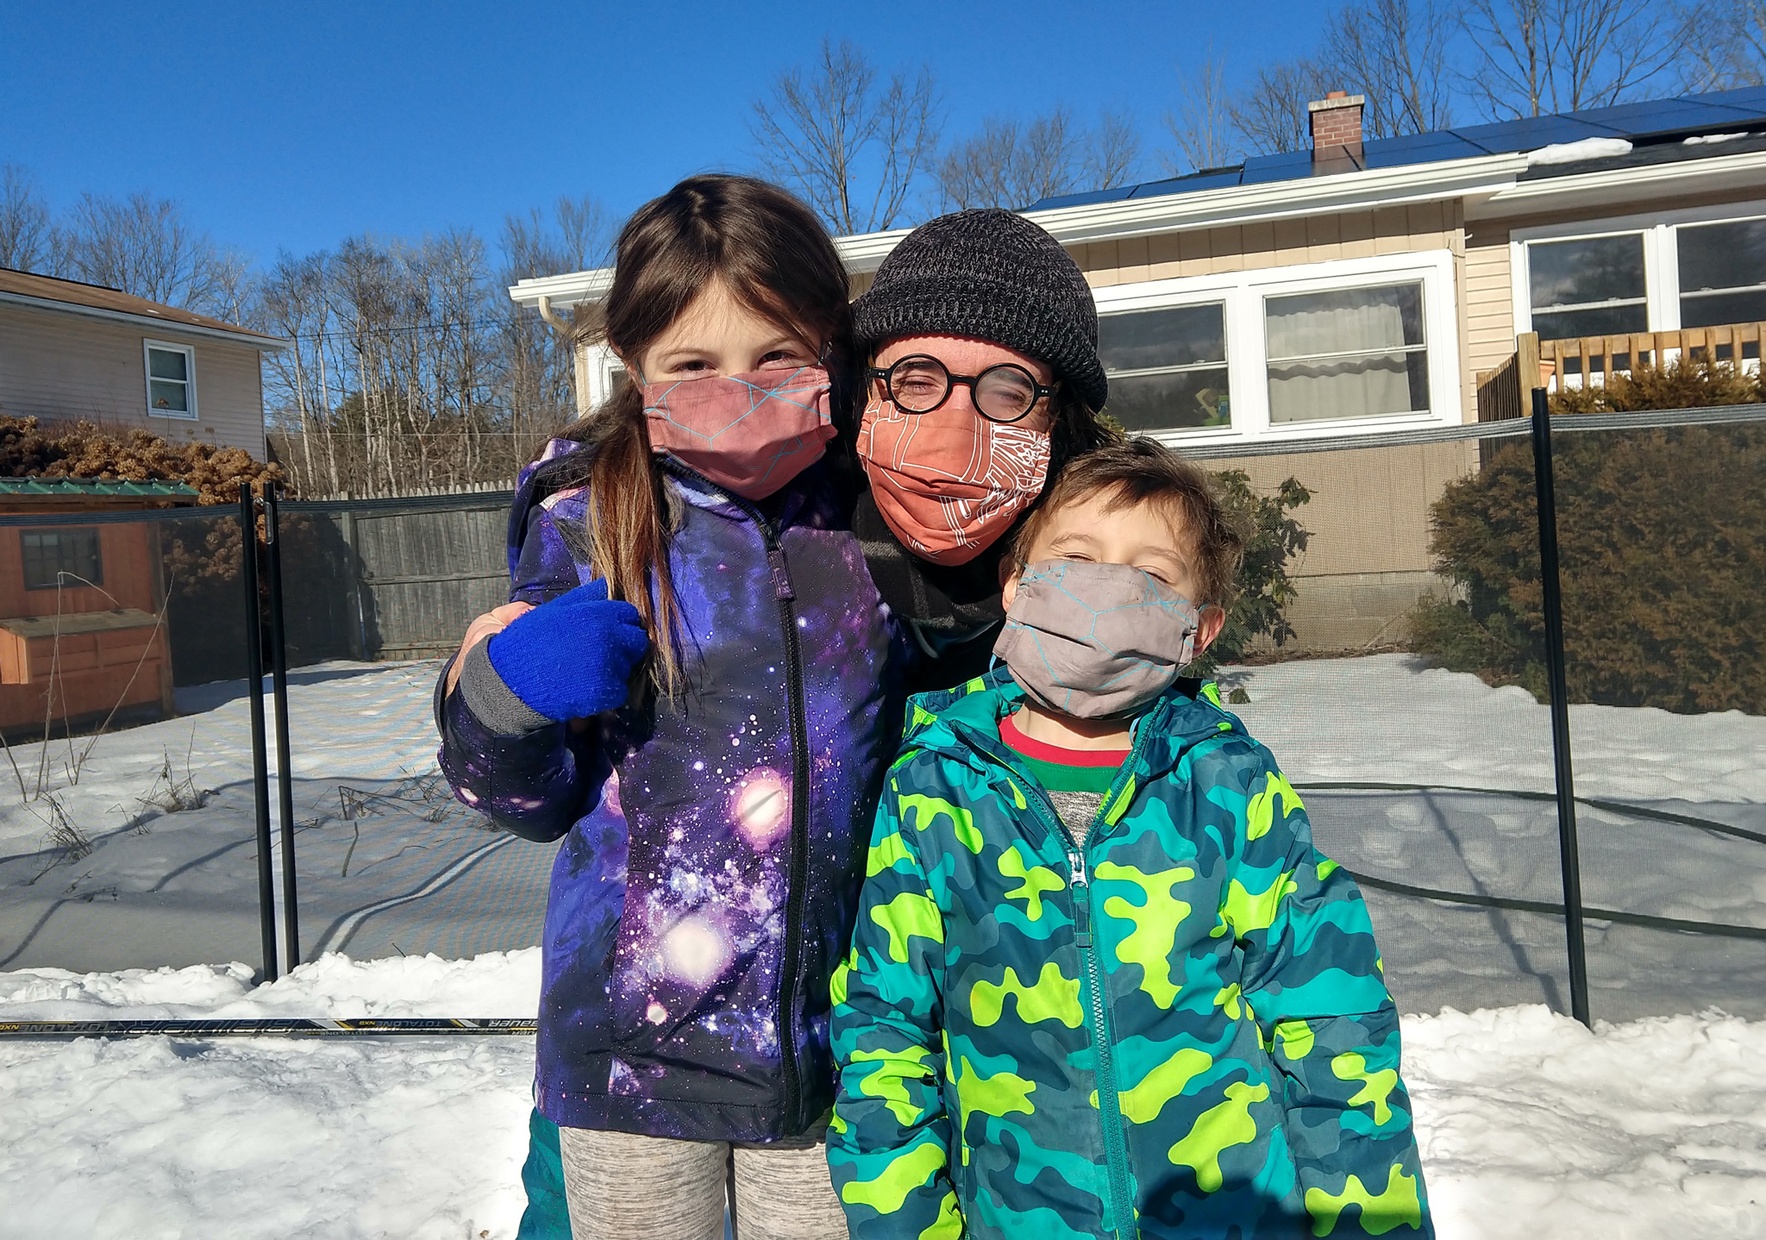 A light-skinned man wearing round glasses and a red mask poses in between two, young light-skinned children wearing snow clothes also wearing masks.